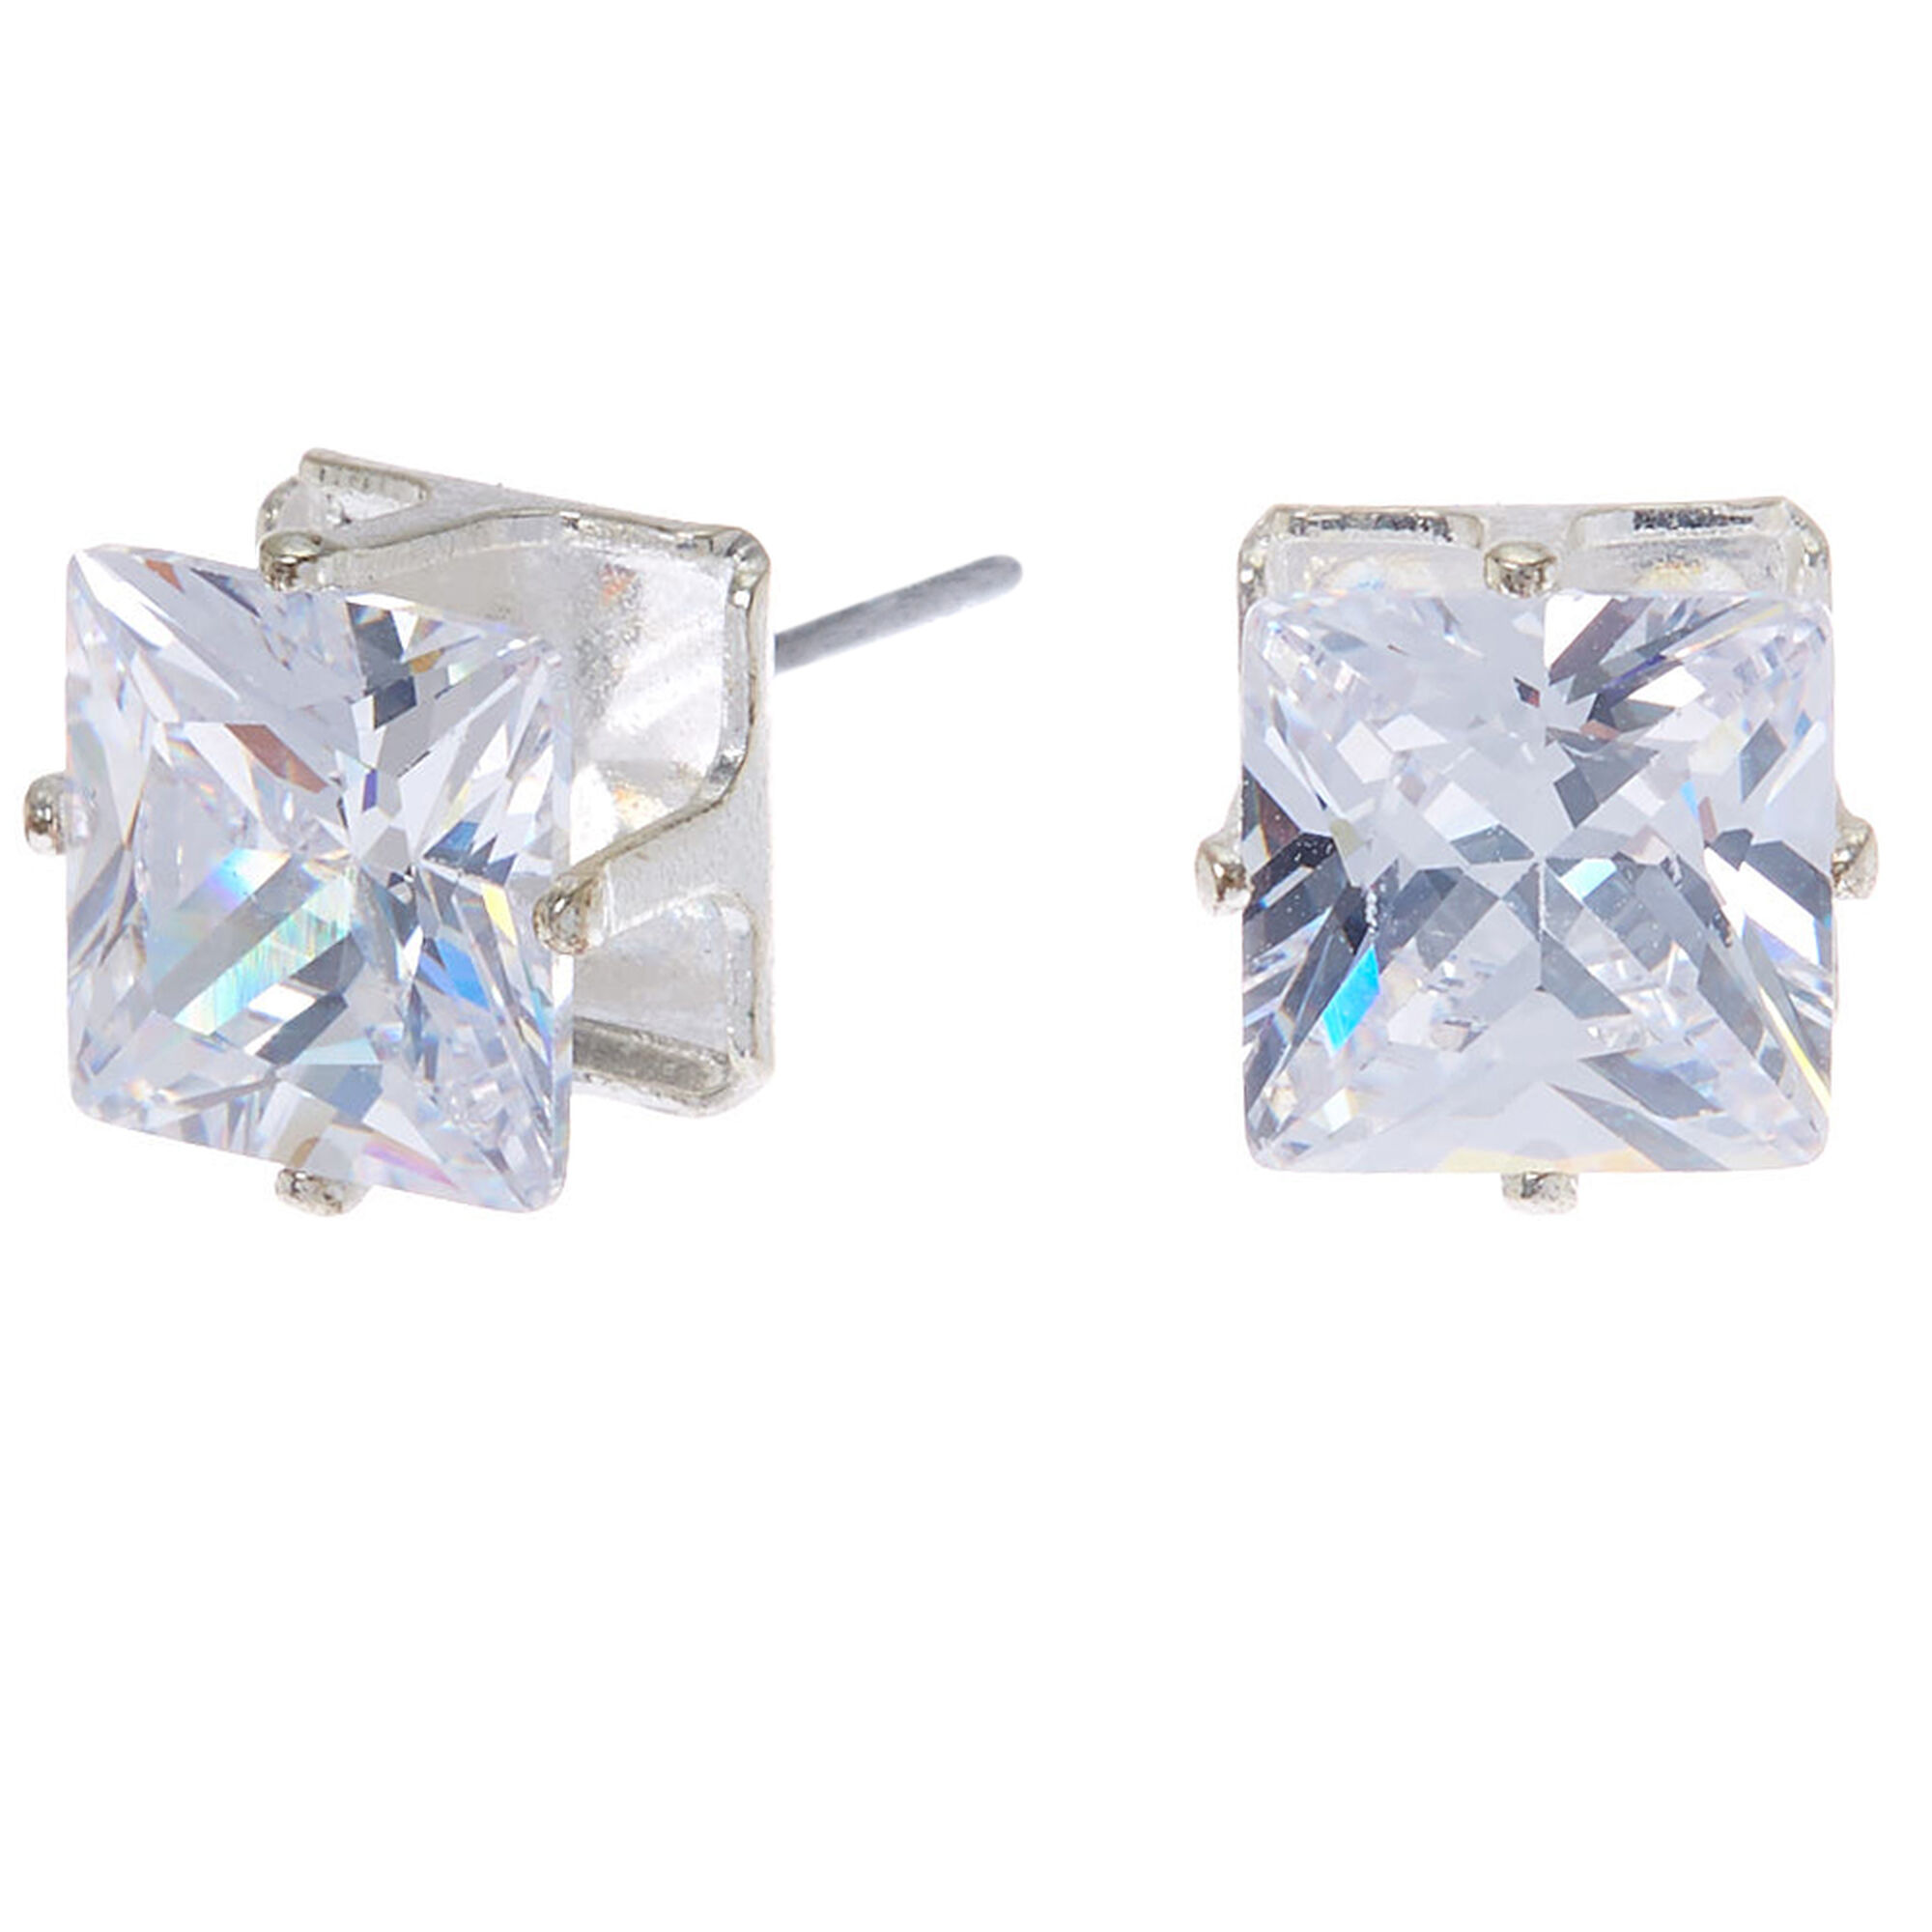 View Claires Tone Cubic Zirconia Square Stud Earrings 8MM Silver information